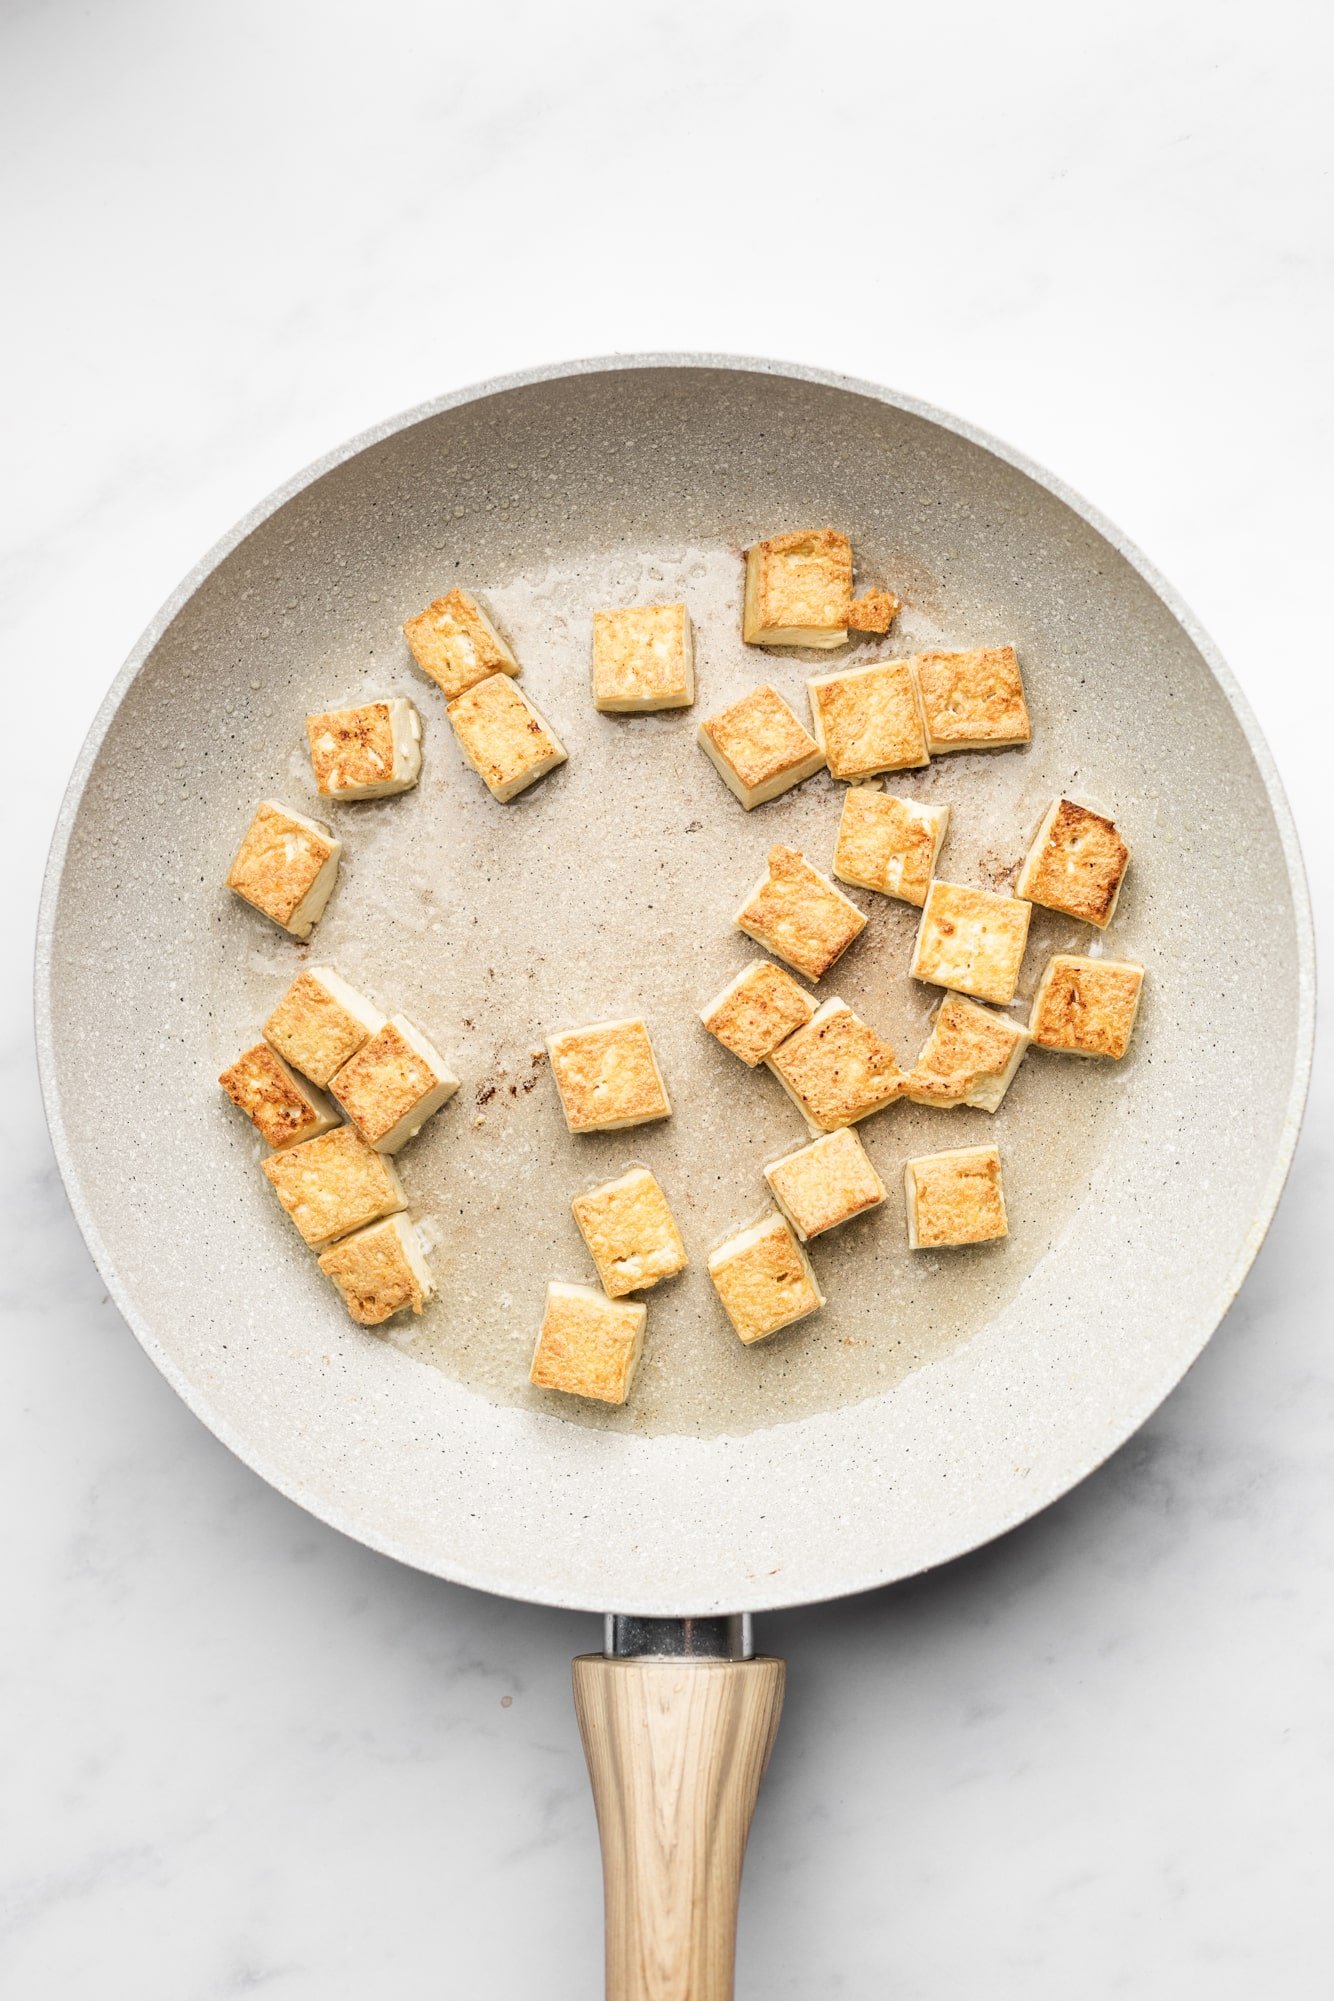 Fry cubed tofu pieces in a beige pan.